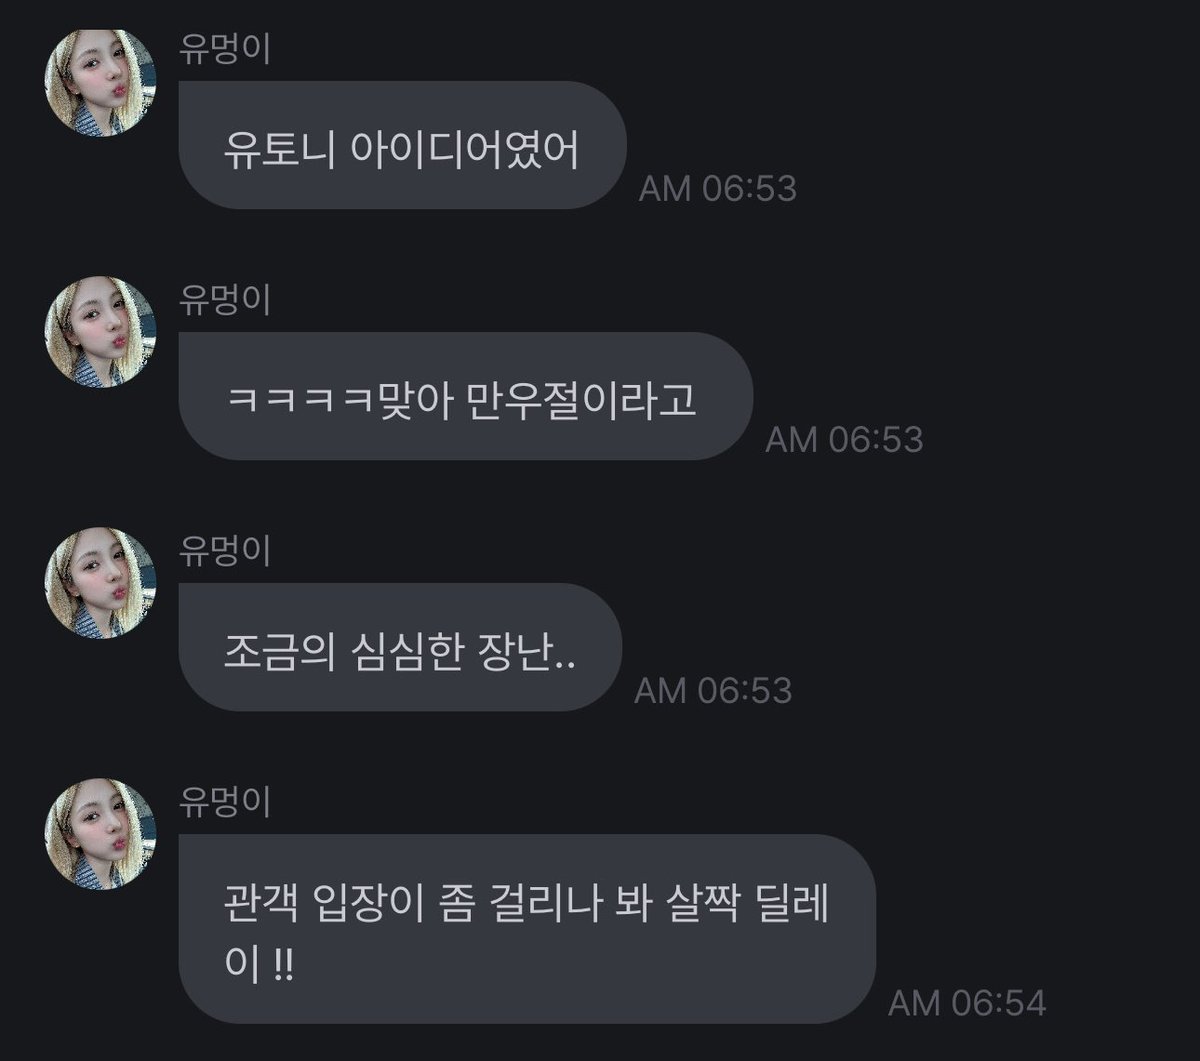 240401 [fr0mm] 🐺

- actually i’m captain
- ㅋㅋㅋㅋㅋhow did you know though?
- it didn’t change?? the picture ??
- ah past messages…
- oh my god
- kim yooton pabo
- you pretended to be fooled? thanks..
- it was yootoni’s idea
- yeah for april fools
- small prank out of boredom